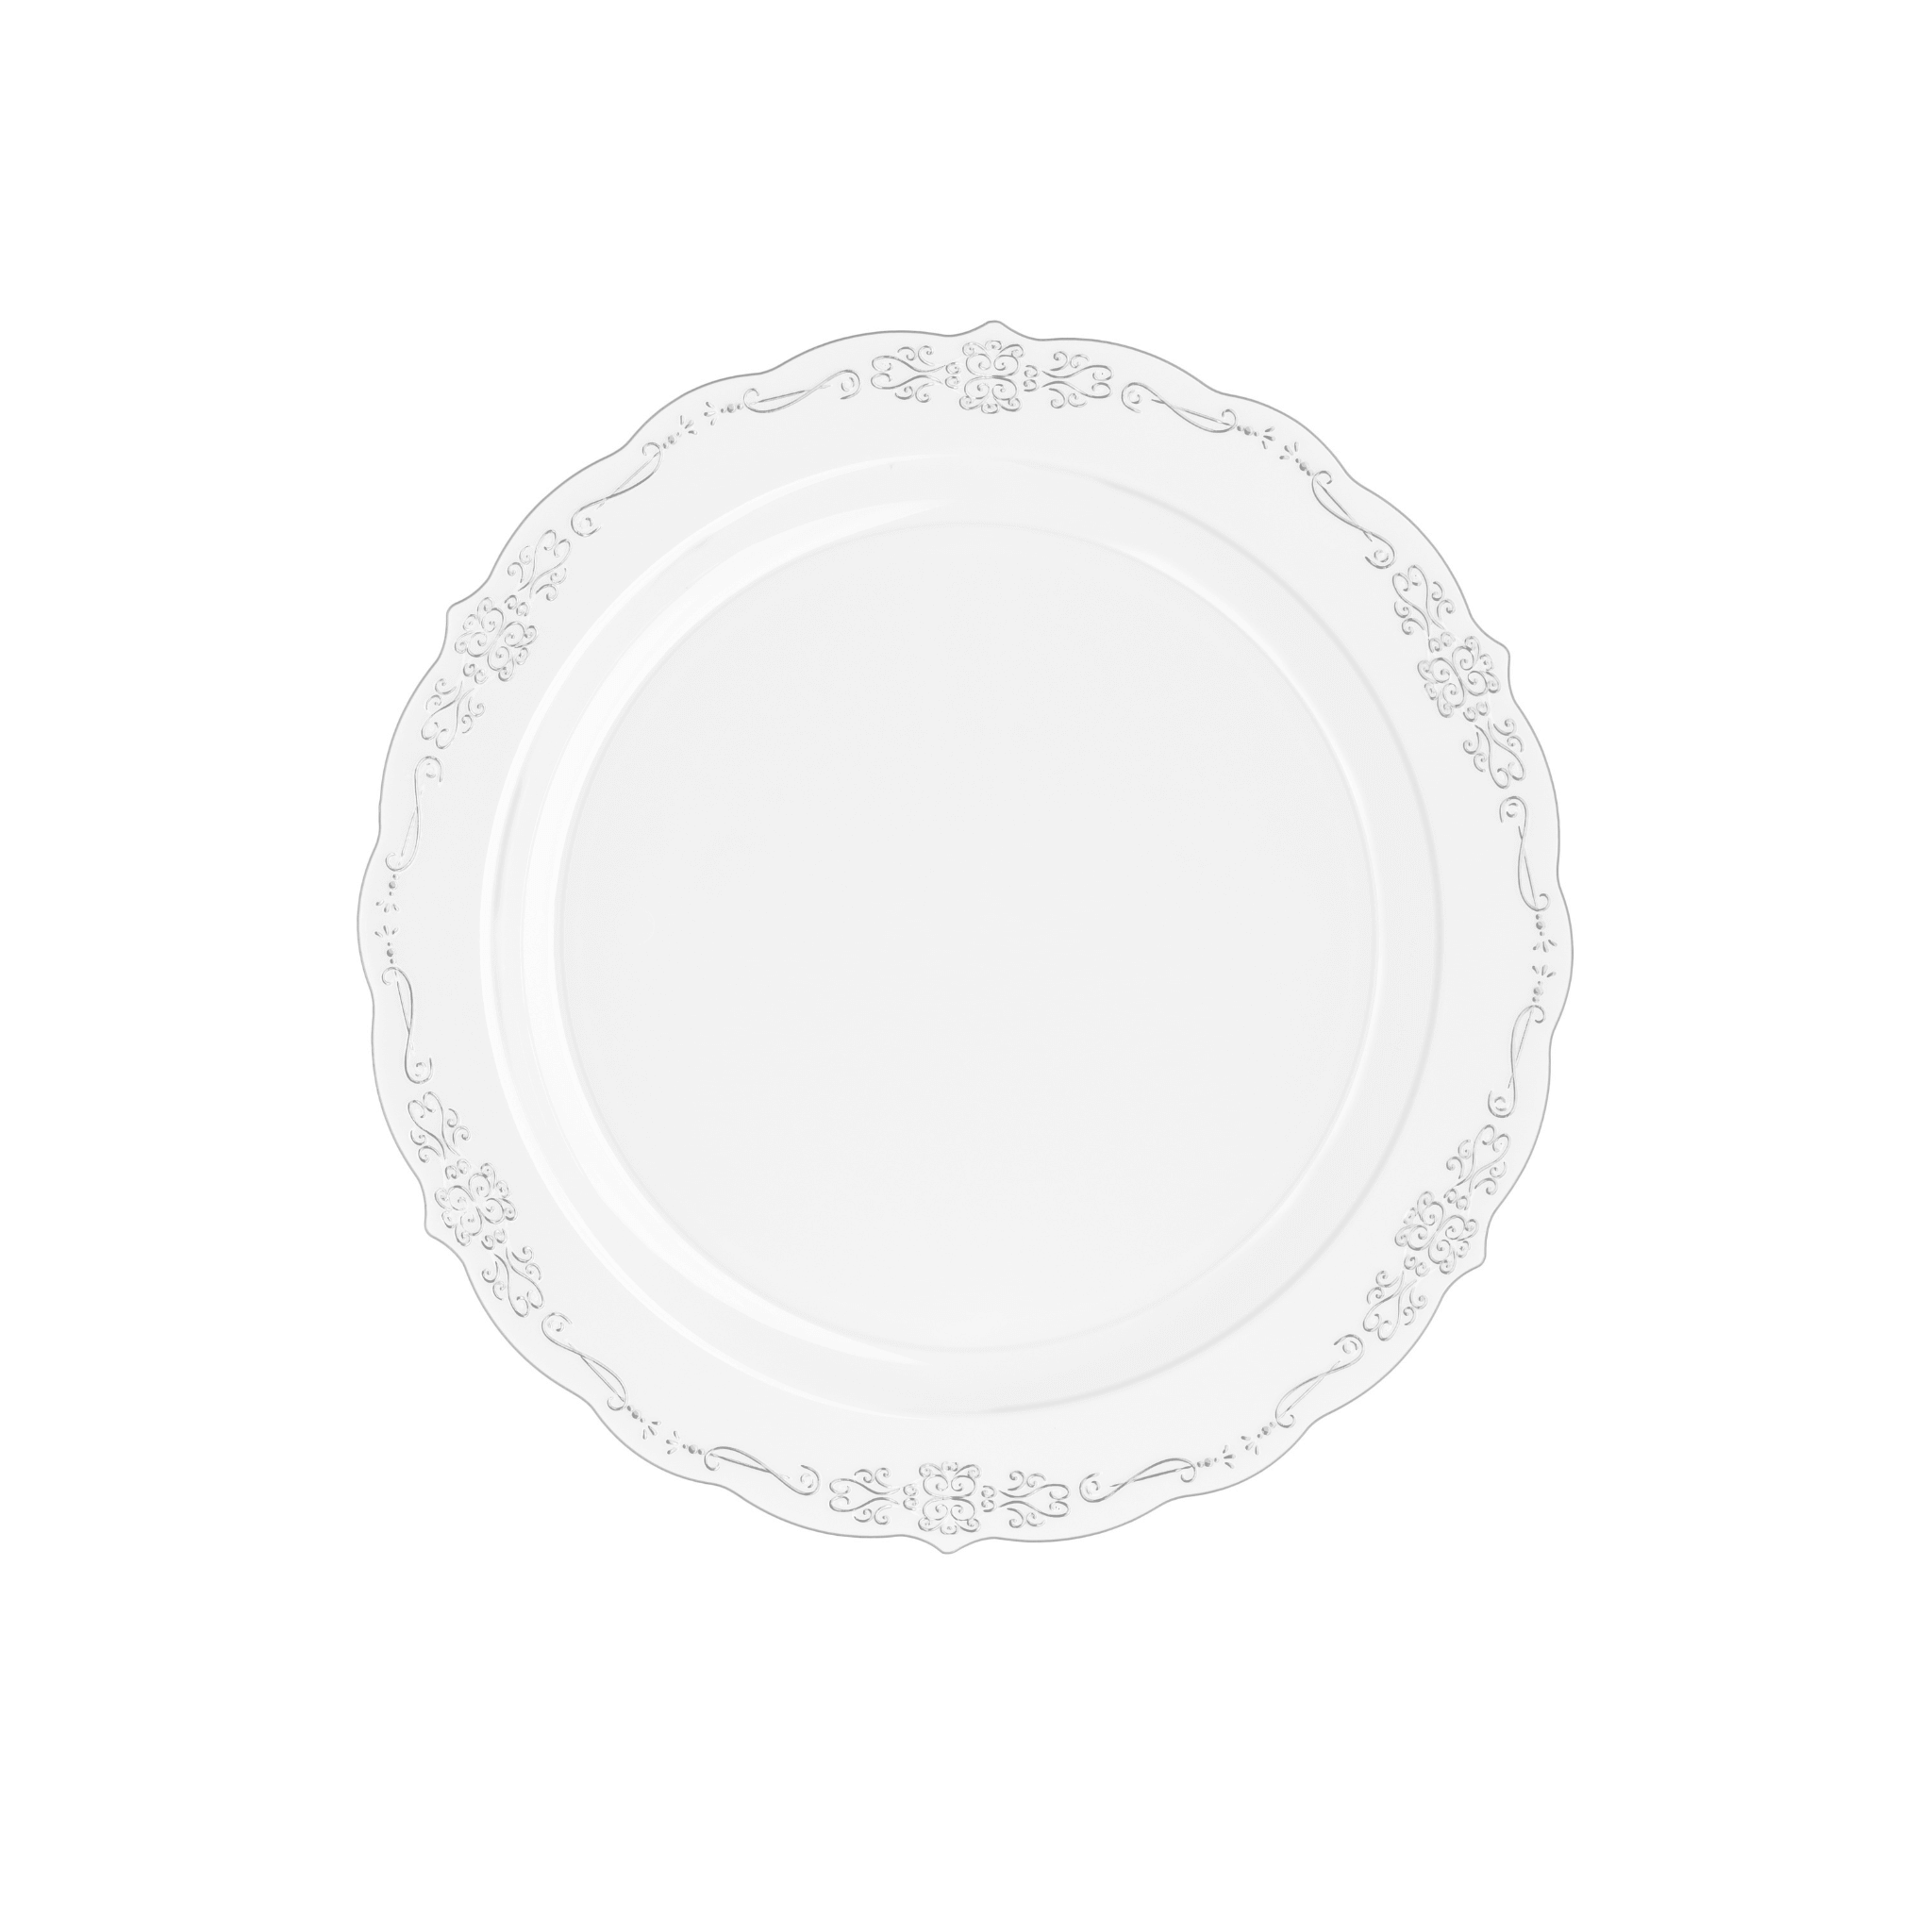 7.5" Clear Victorian Design Plastic Plates (120 Count) - Yom Tov Settings